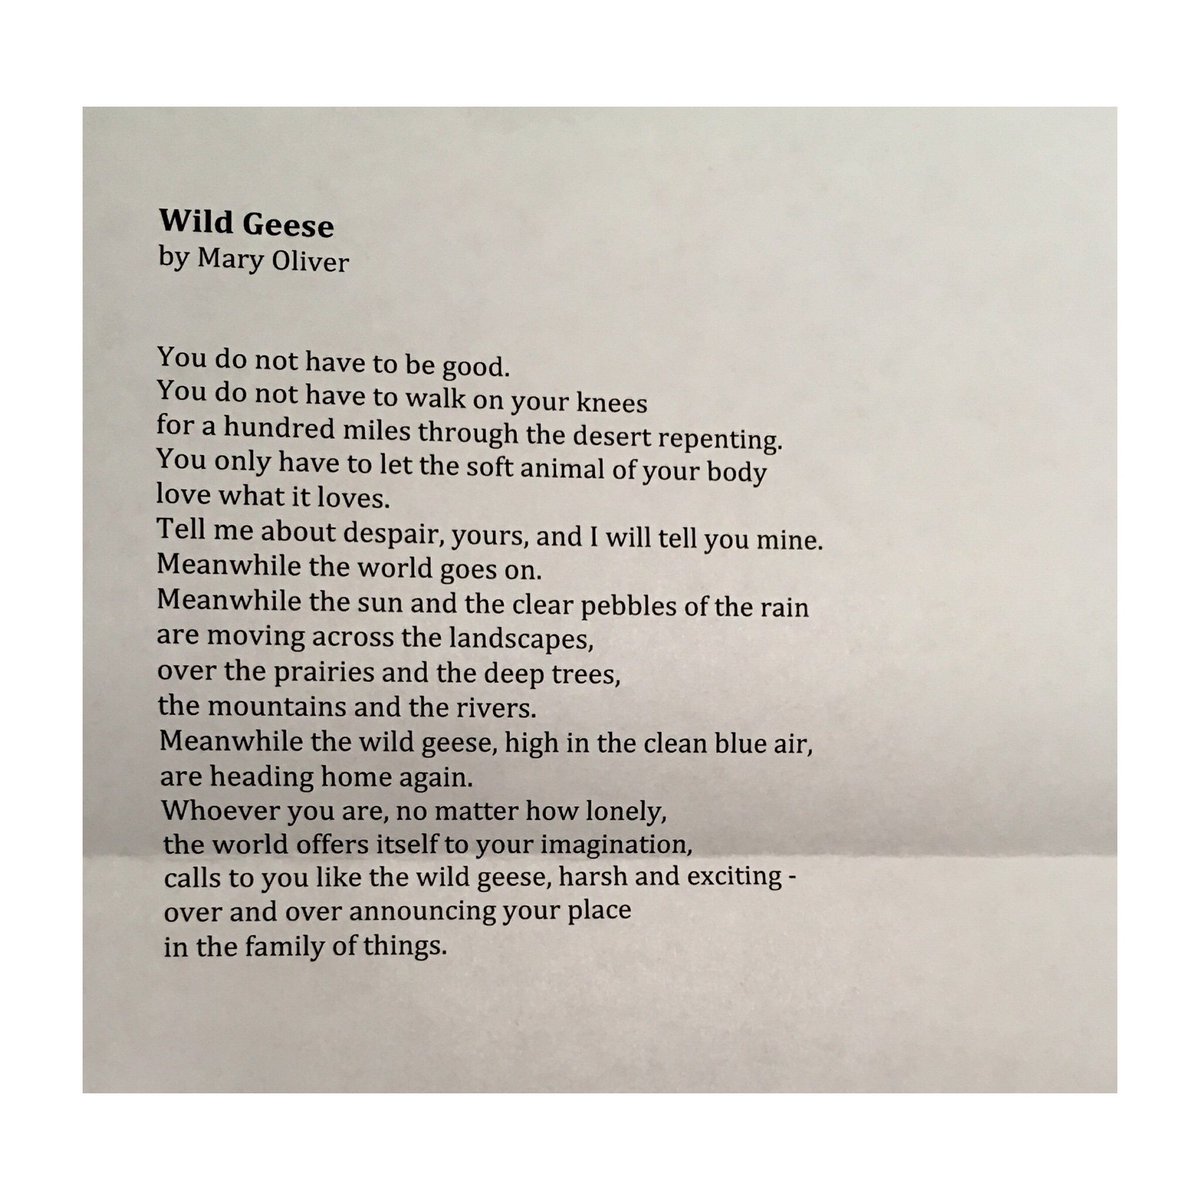 I’m so happy that I discovered @PoetryExch @KingsPlace. Thank you for the gift 🙏🏾#PoemsAsFriends #MaryOliver #WildGeese #extraordinary #poetry 💖💫🦚